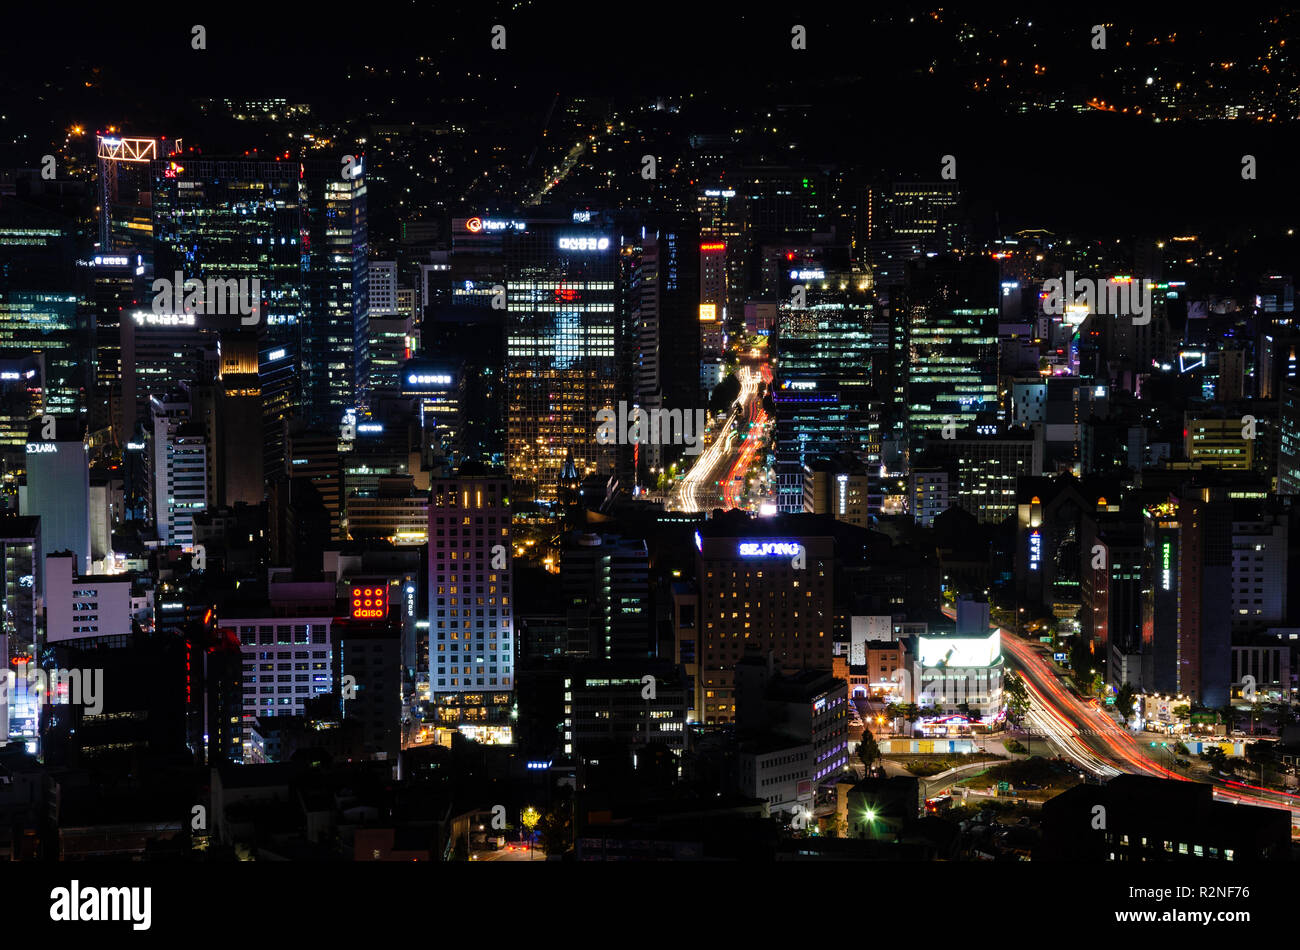 A view of the city of Seoul below at night, lit up with city lights taken form a high vantage point next to Namsan Tower. Seoul, South Korea. Stock Photo